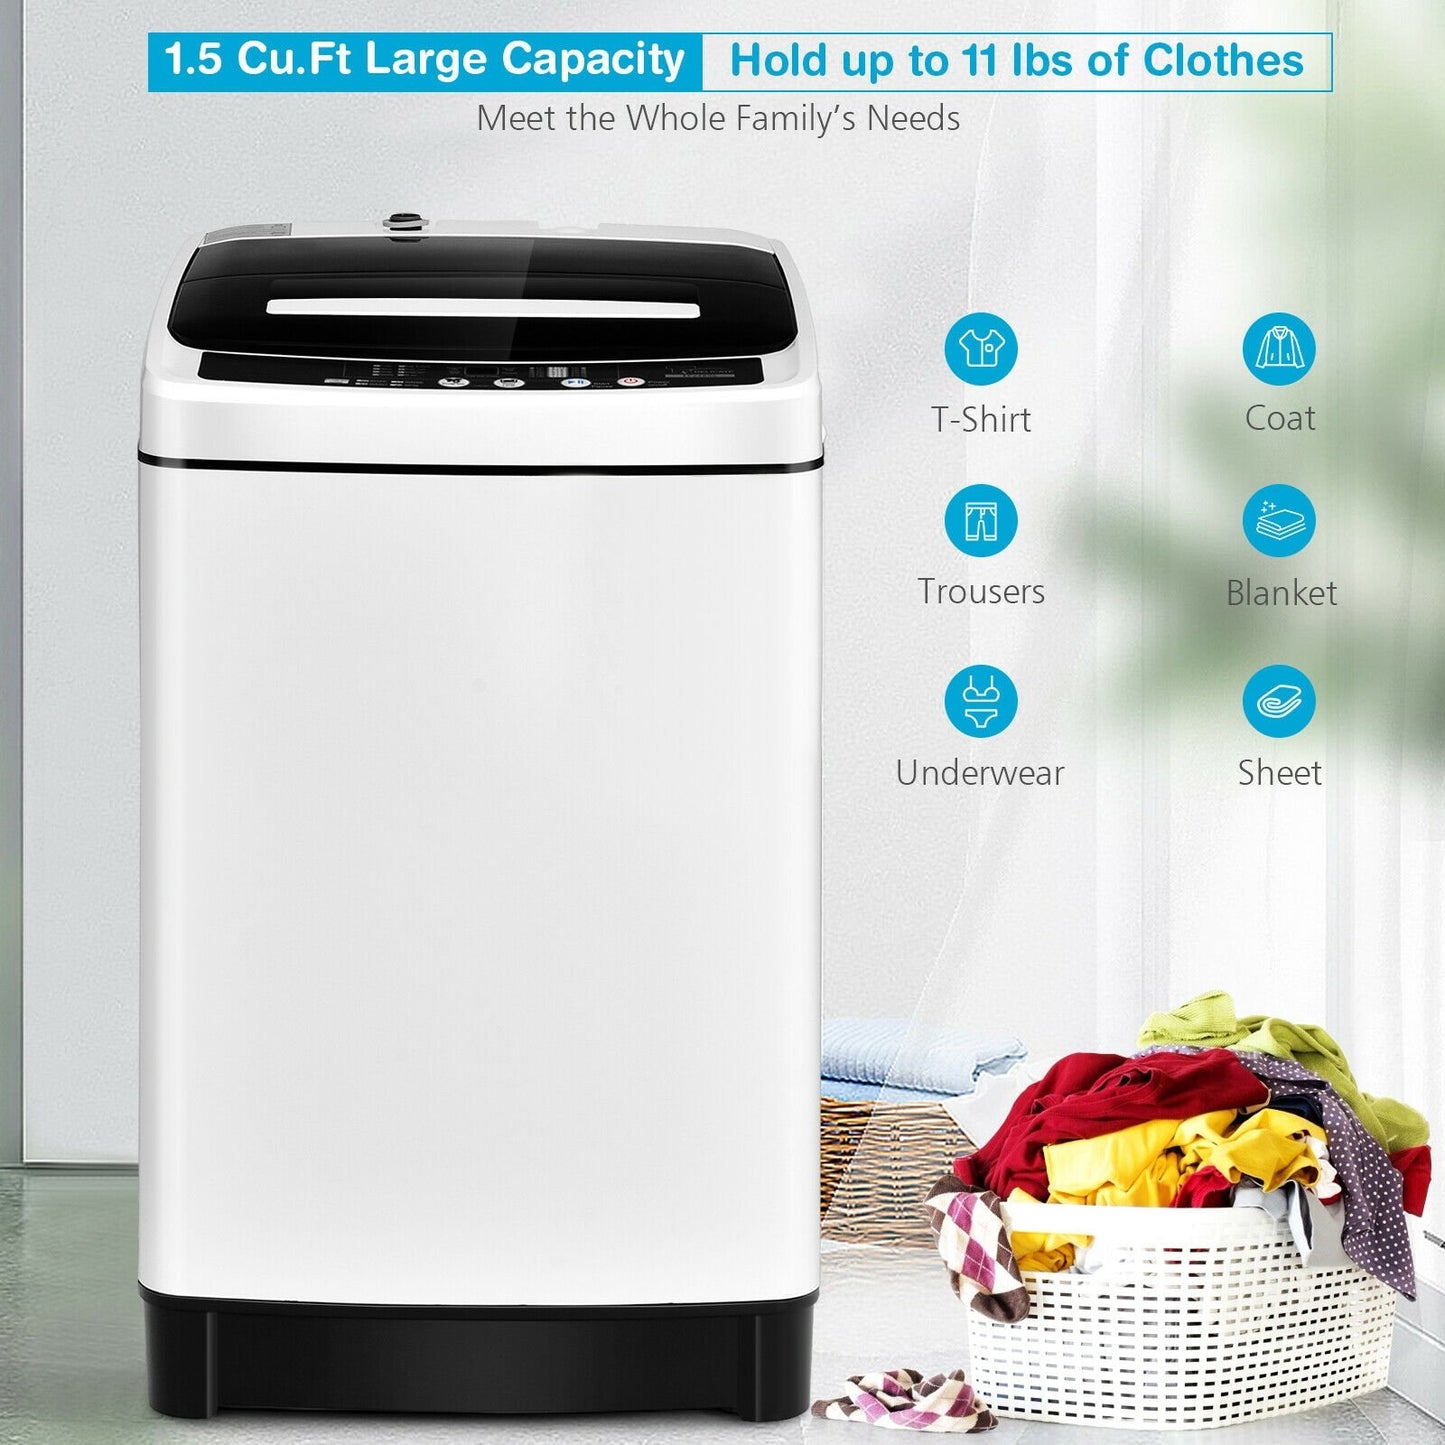 Full-Automatic Washing Machine 1.5 Cu.Ft 11 LBS Washer and Dryer, White at Gallery Canada